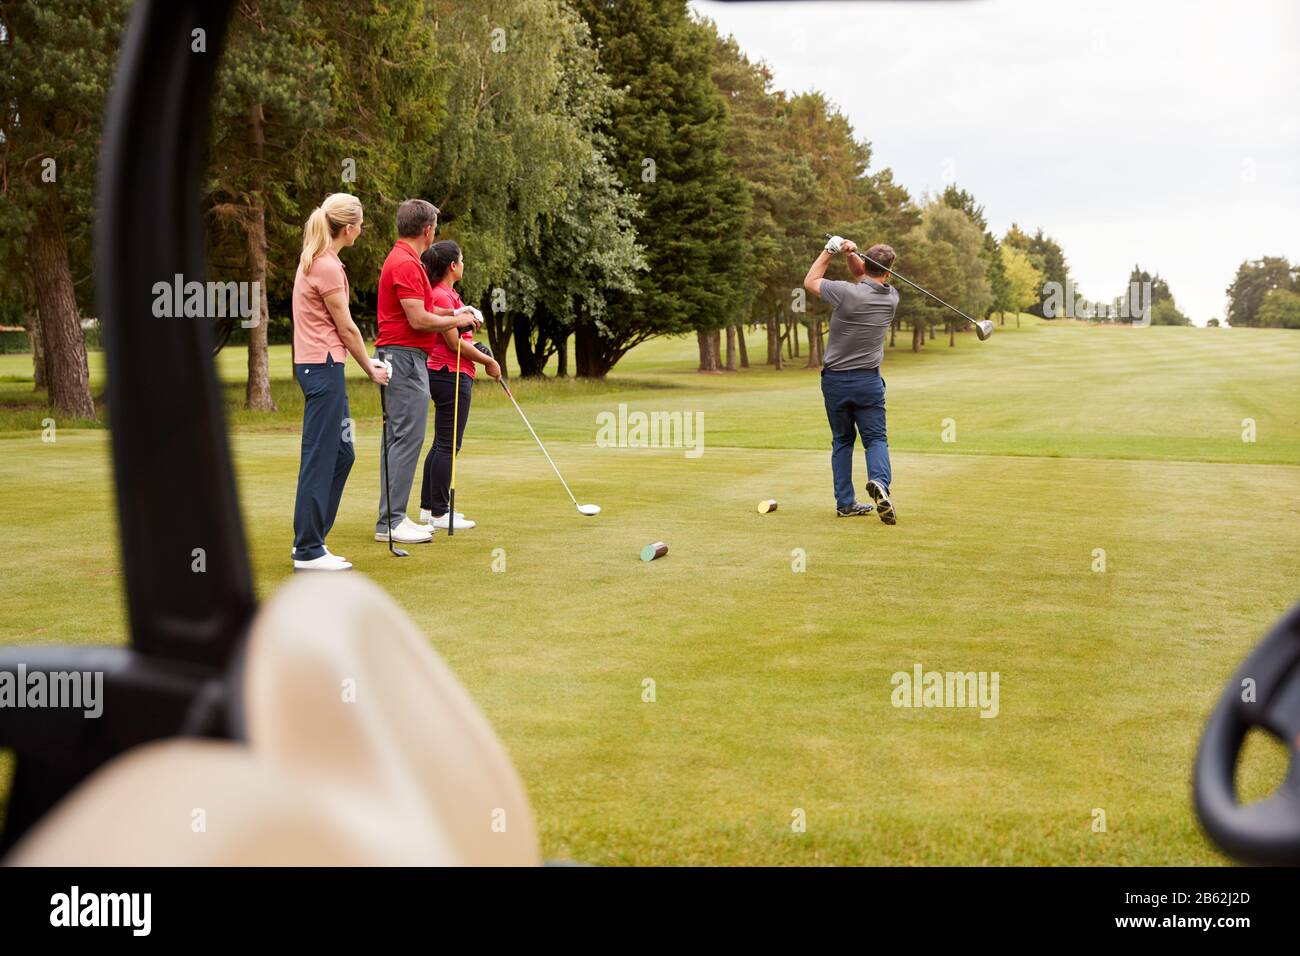 Two Couples Golfing Hitting Tee Shot Along Fairway With Driver With Buggy In Foreground Stock Photo